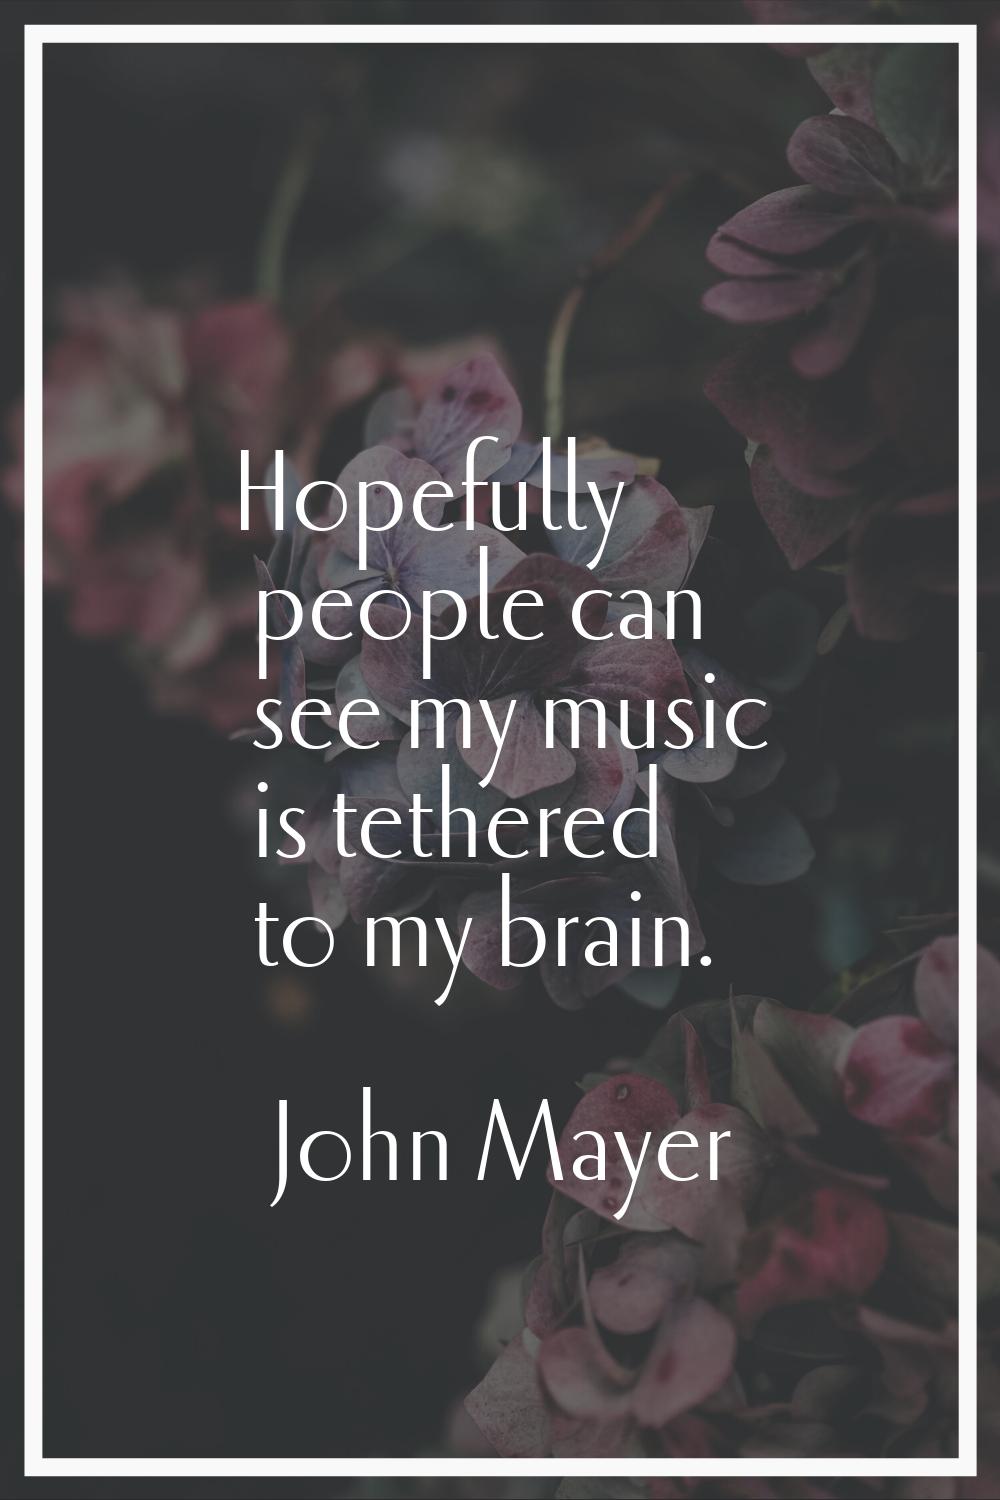 Hopefully people can see my music is tethered to my brain.